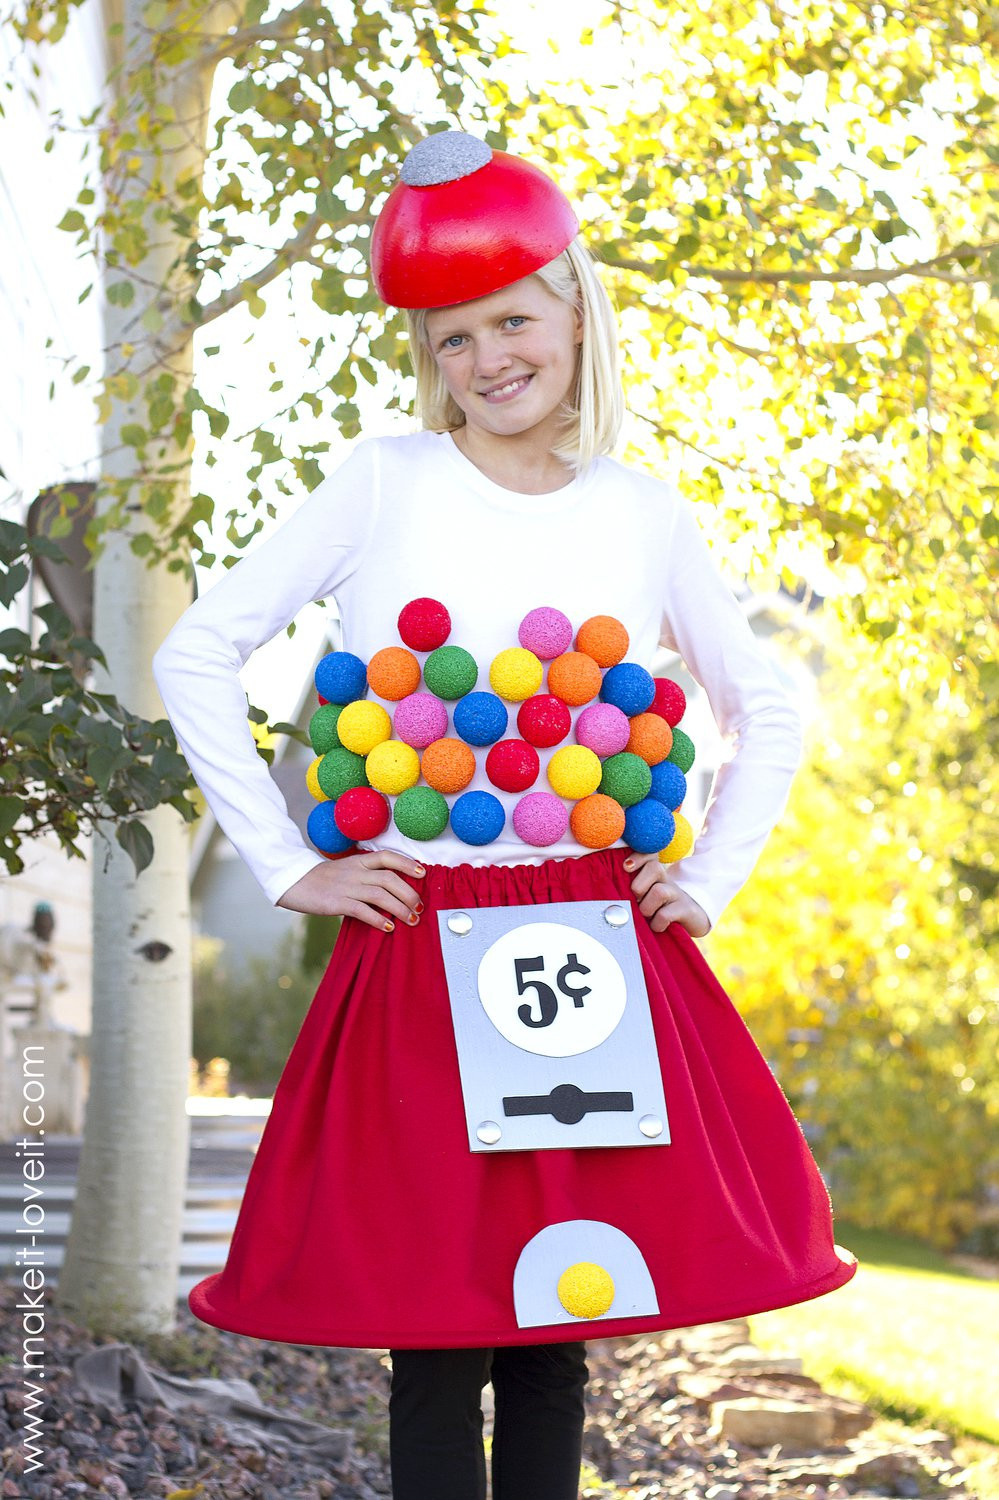 DIY Gumball Machine Costume
 38 of the most CLEVER & UNIQUE Costume Ideas